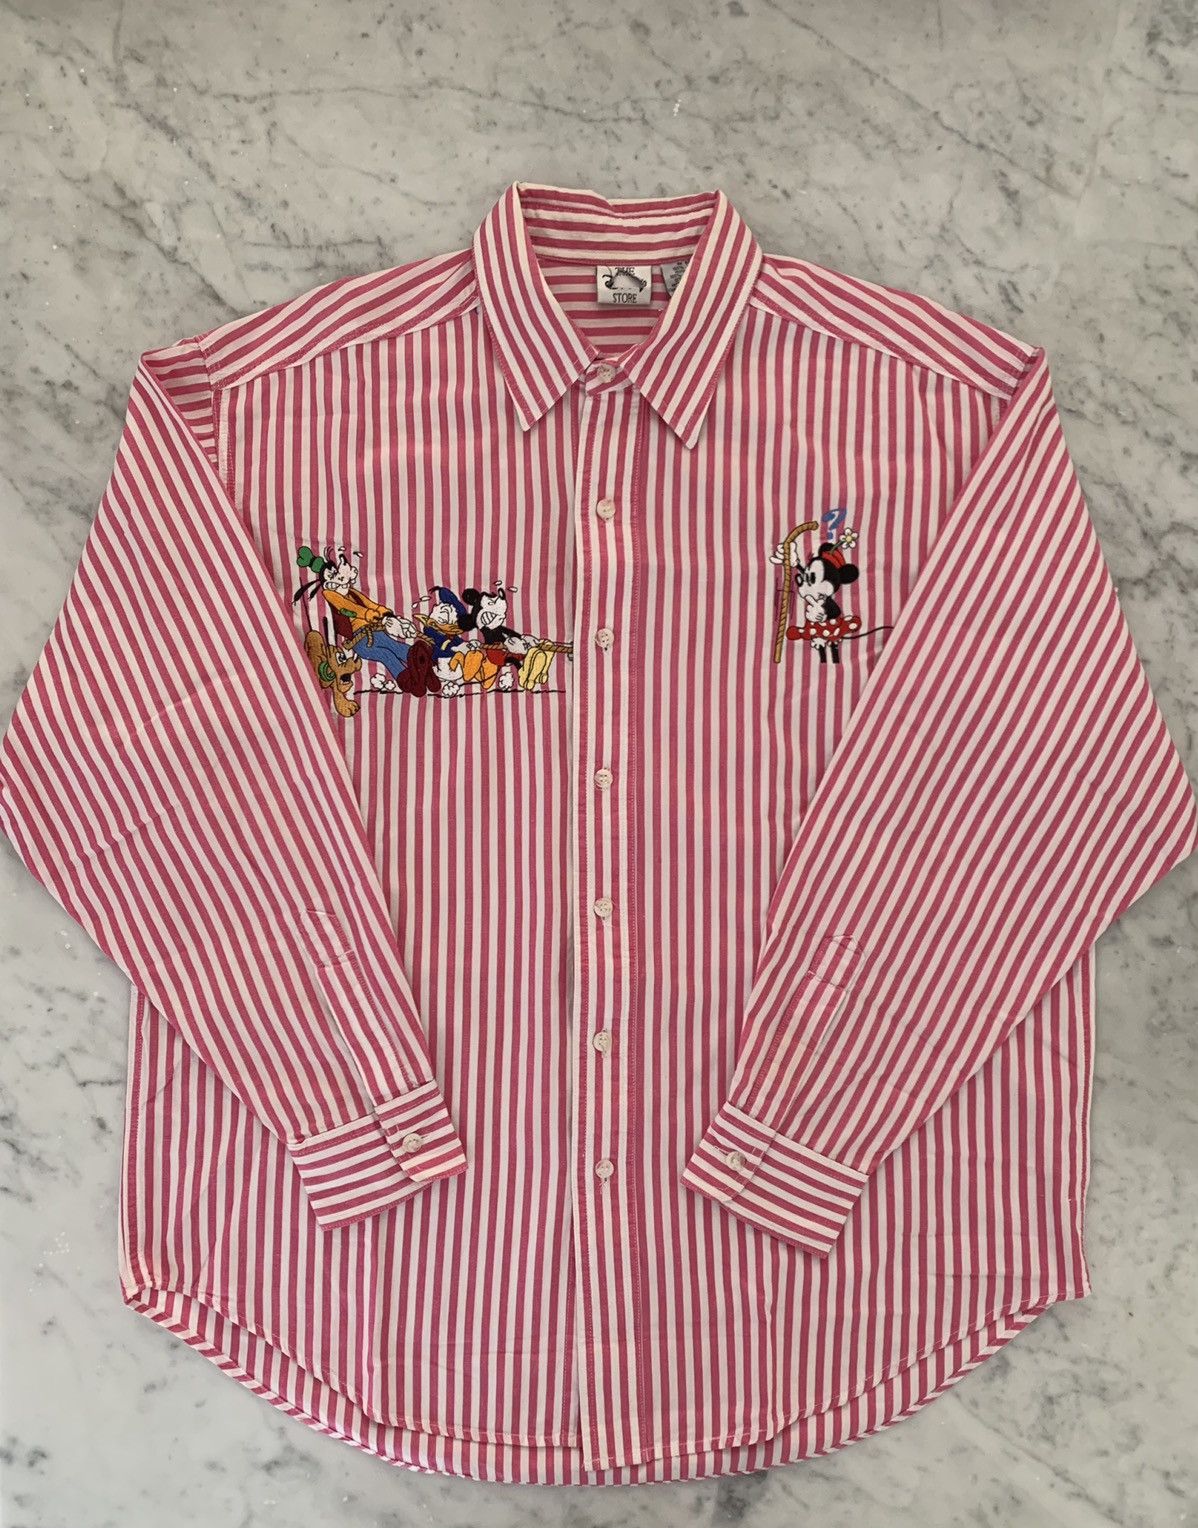 Vintage Disney Mickey Mouse Button Up Shirt | Grailed